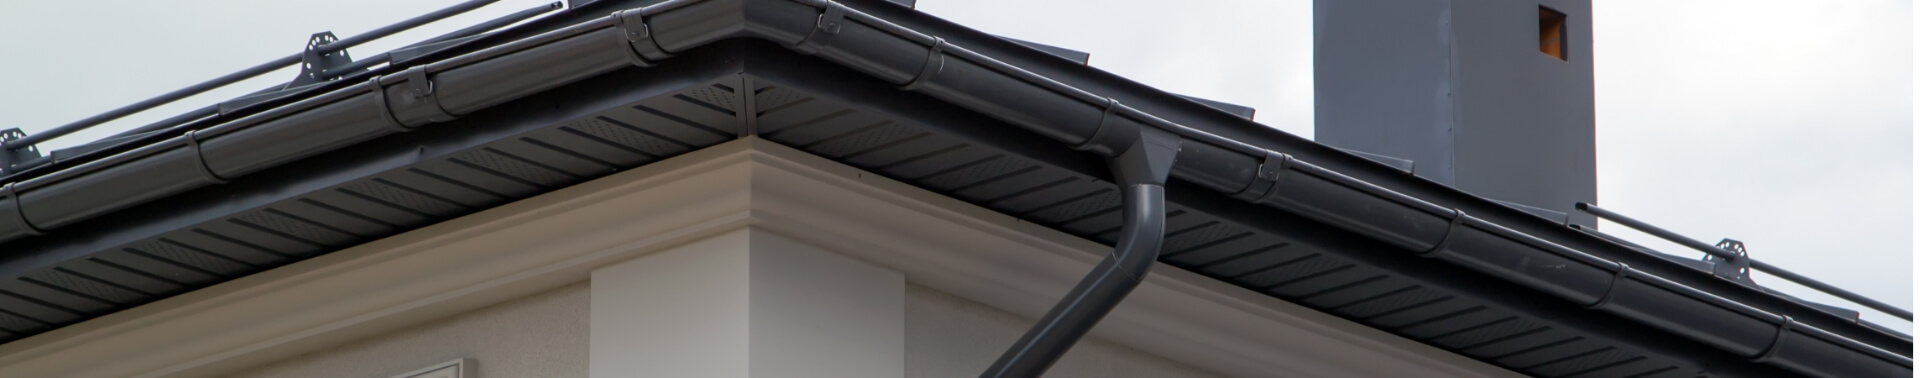 box-gutters-and-sumps-banner